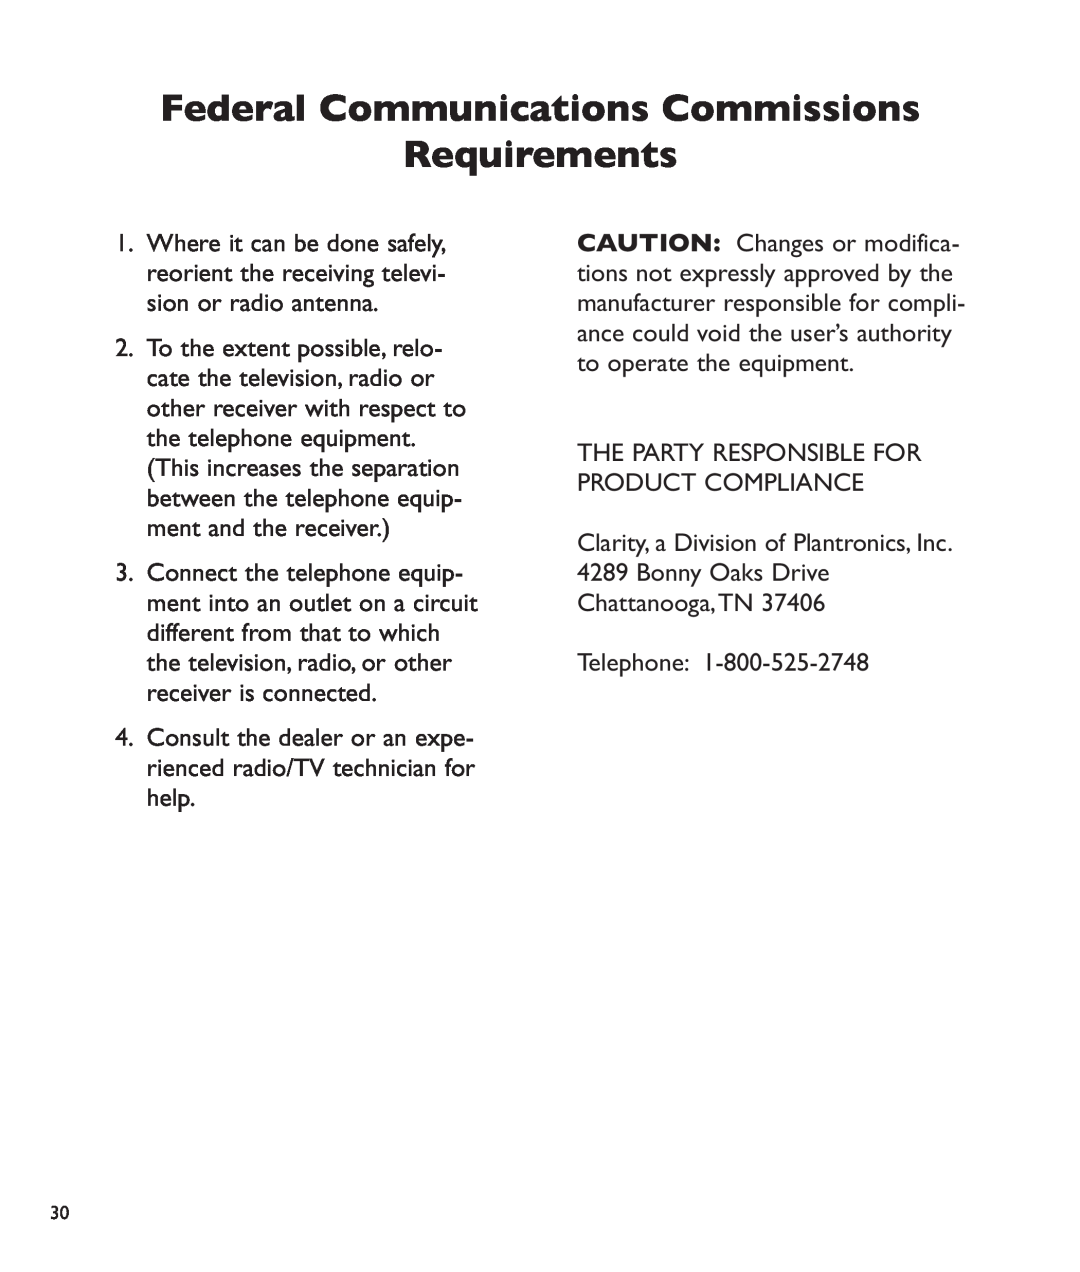 Clarity c2210 manual Federal Communications Commissions Requirements 